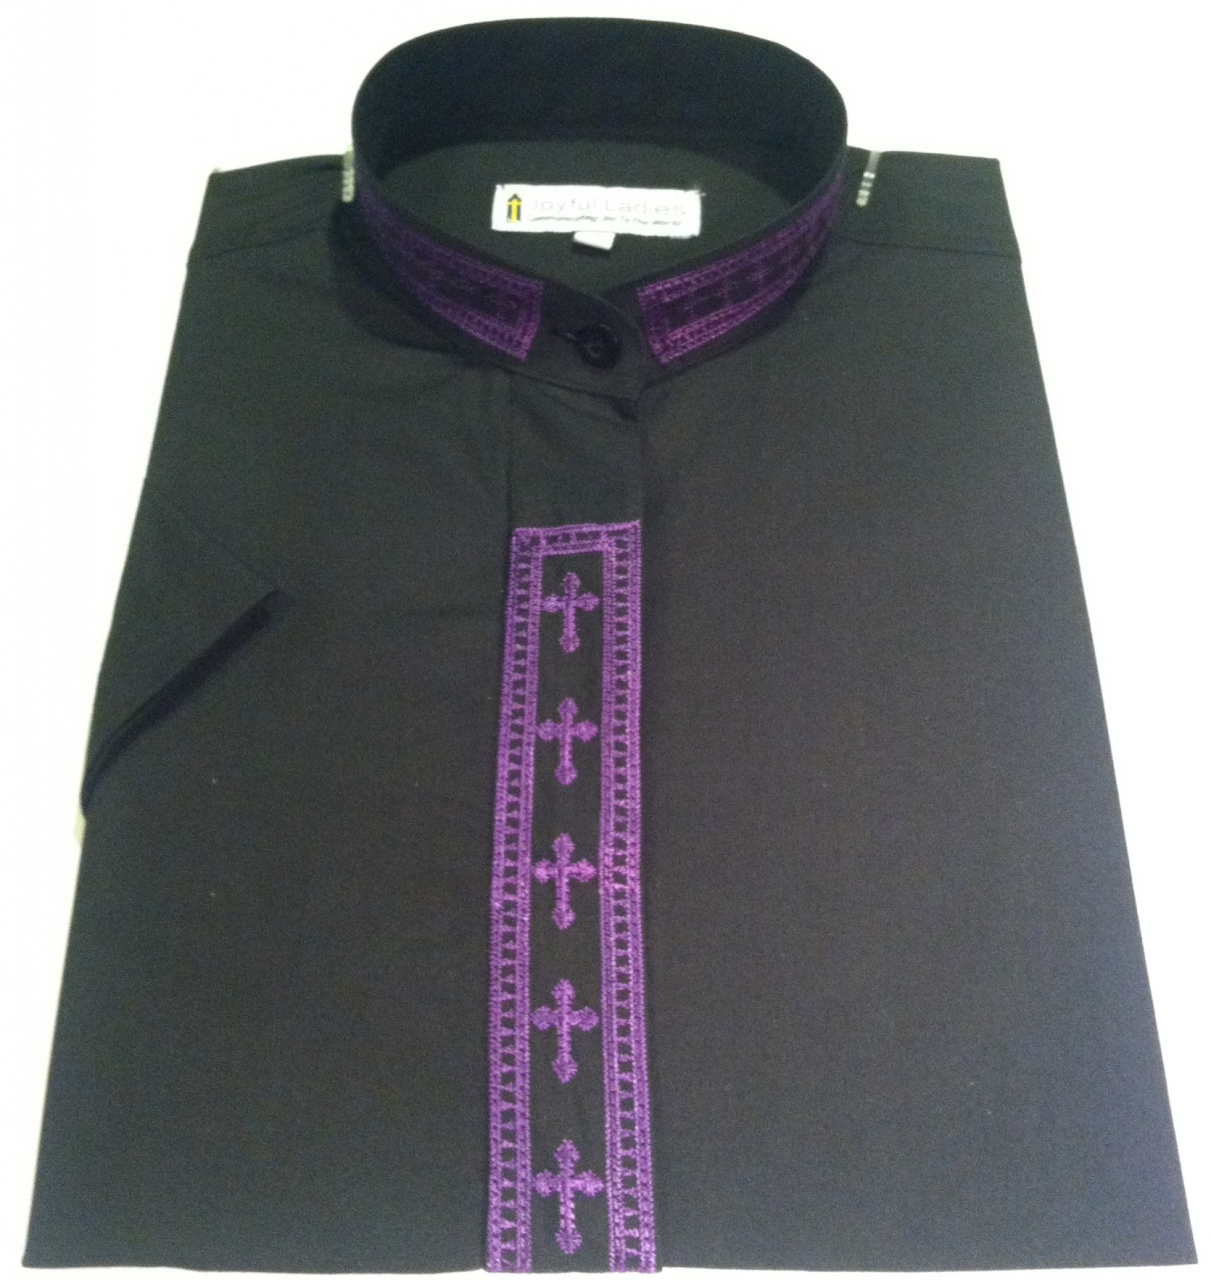 759. Women's Short-Sleeve Clergy Shirt With Fine Embroidery - Black/Purple